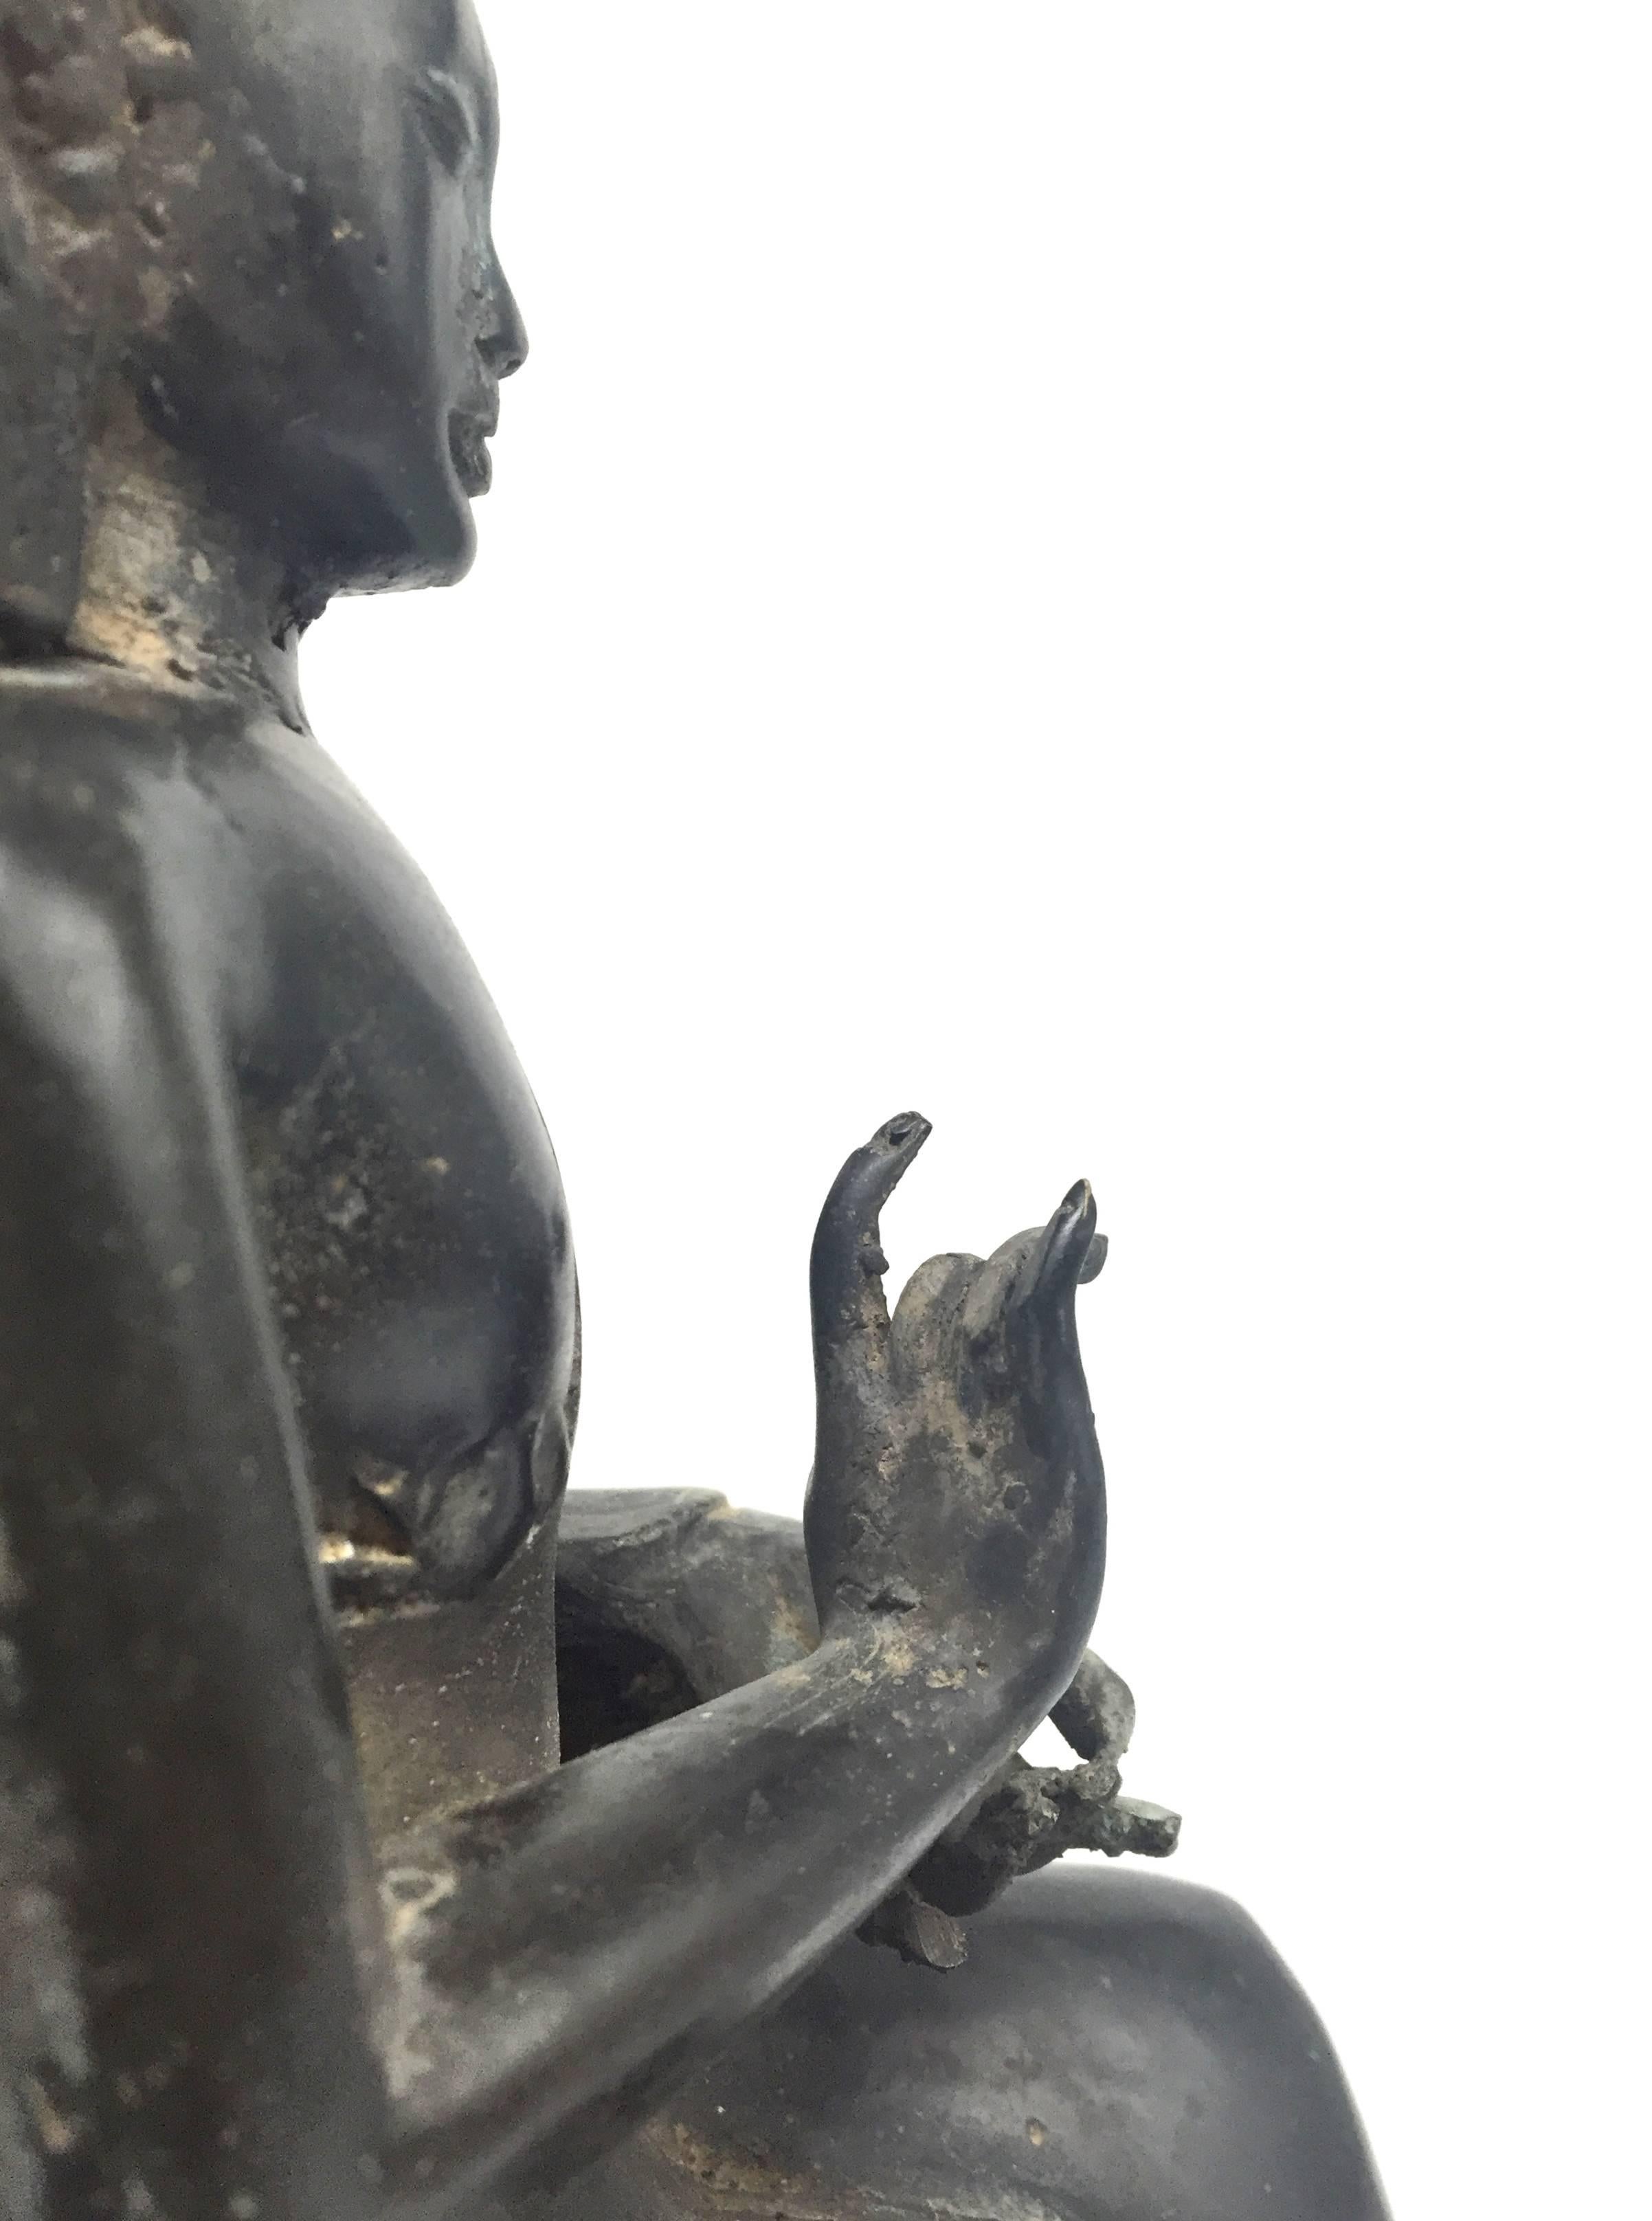 A fine 20th century Burmese bronze Buddha.

The Buddha is seated on a throne with two lions anchoring the base. His back features beasts and warriors with a halo above and behind. His ankles are together with a decorated sash draping down to meet